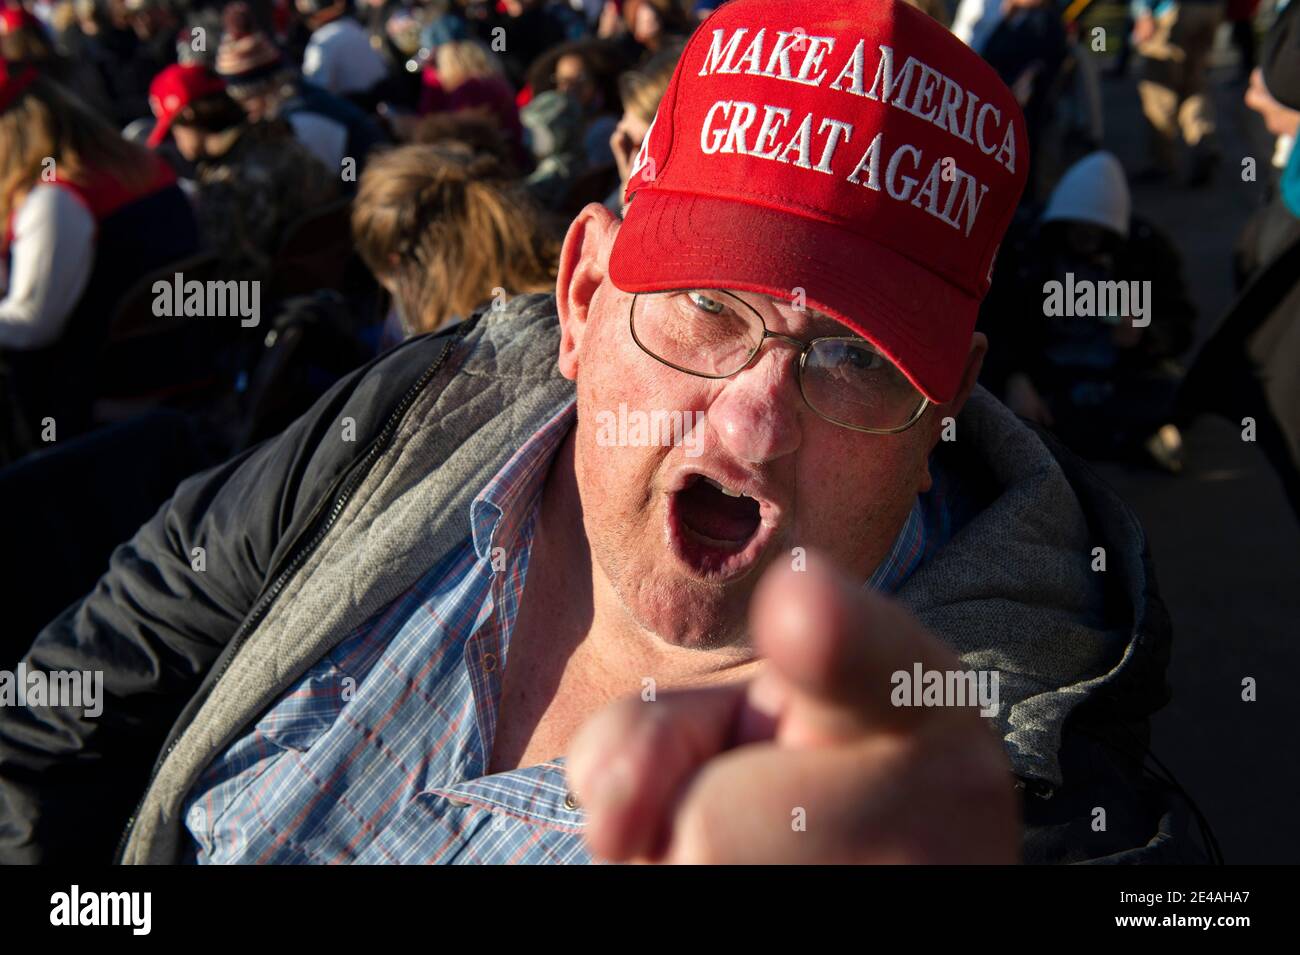 maga-man-december-5-2020-valdosta-georgia-usa-elderly-white-male-wearing-a-make-america-great-again-maga-red-baseball-cap-angrily-yells-and-points-at-media-the-trump-supporter-from-central-georgia-displays-his-disdain-for-news-media-call-it-all-fake-news-thousands-of-trump-supporters-converged-on-small-town-for-georgia-victory-rally-to-show-support-for-president-trump-and-two-republican-incumbent-us-senators-loeffler-and-perdue-who-face-democratic-challengers-in-special-run-run-off-election-january-5-2021-the-election-could-decide-control-of-the-us-senate-credit-image-2E4AHA7.jpg